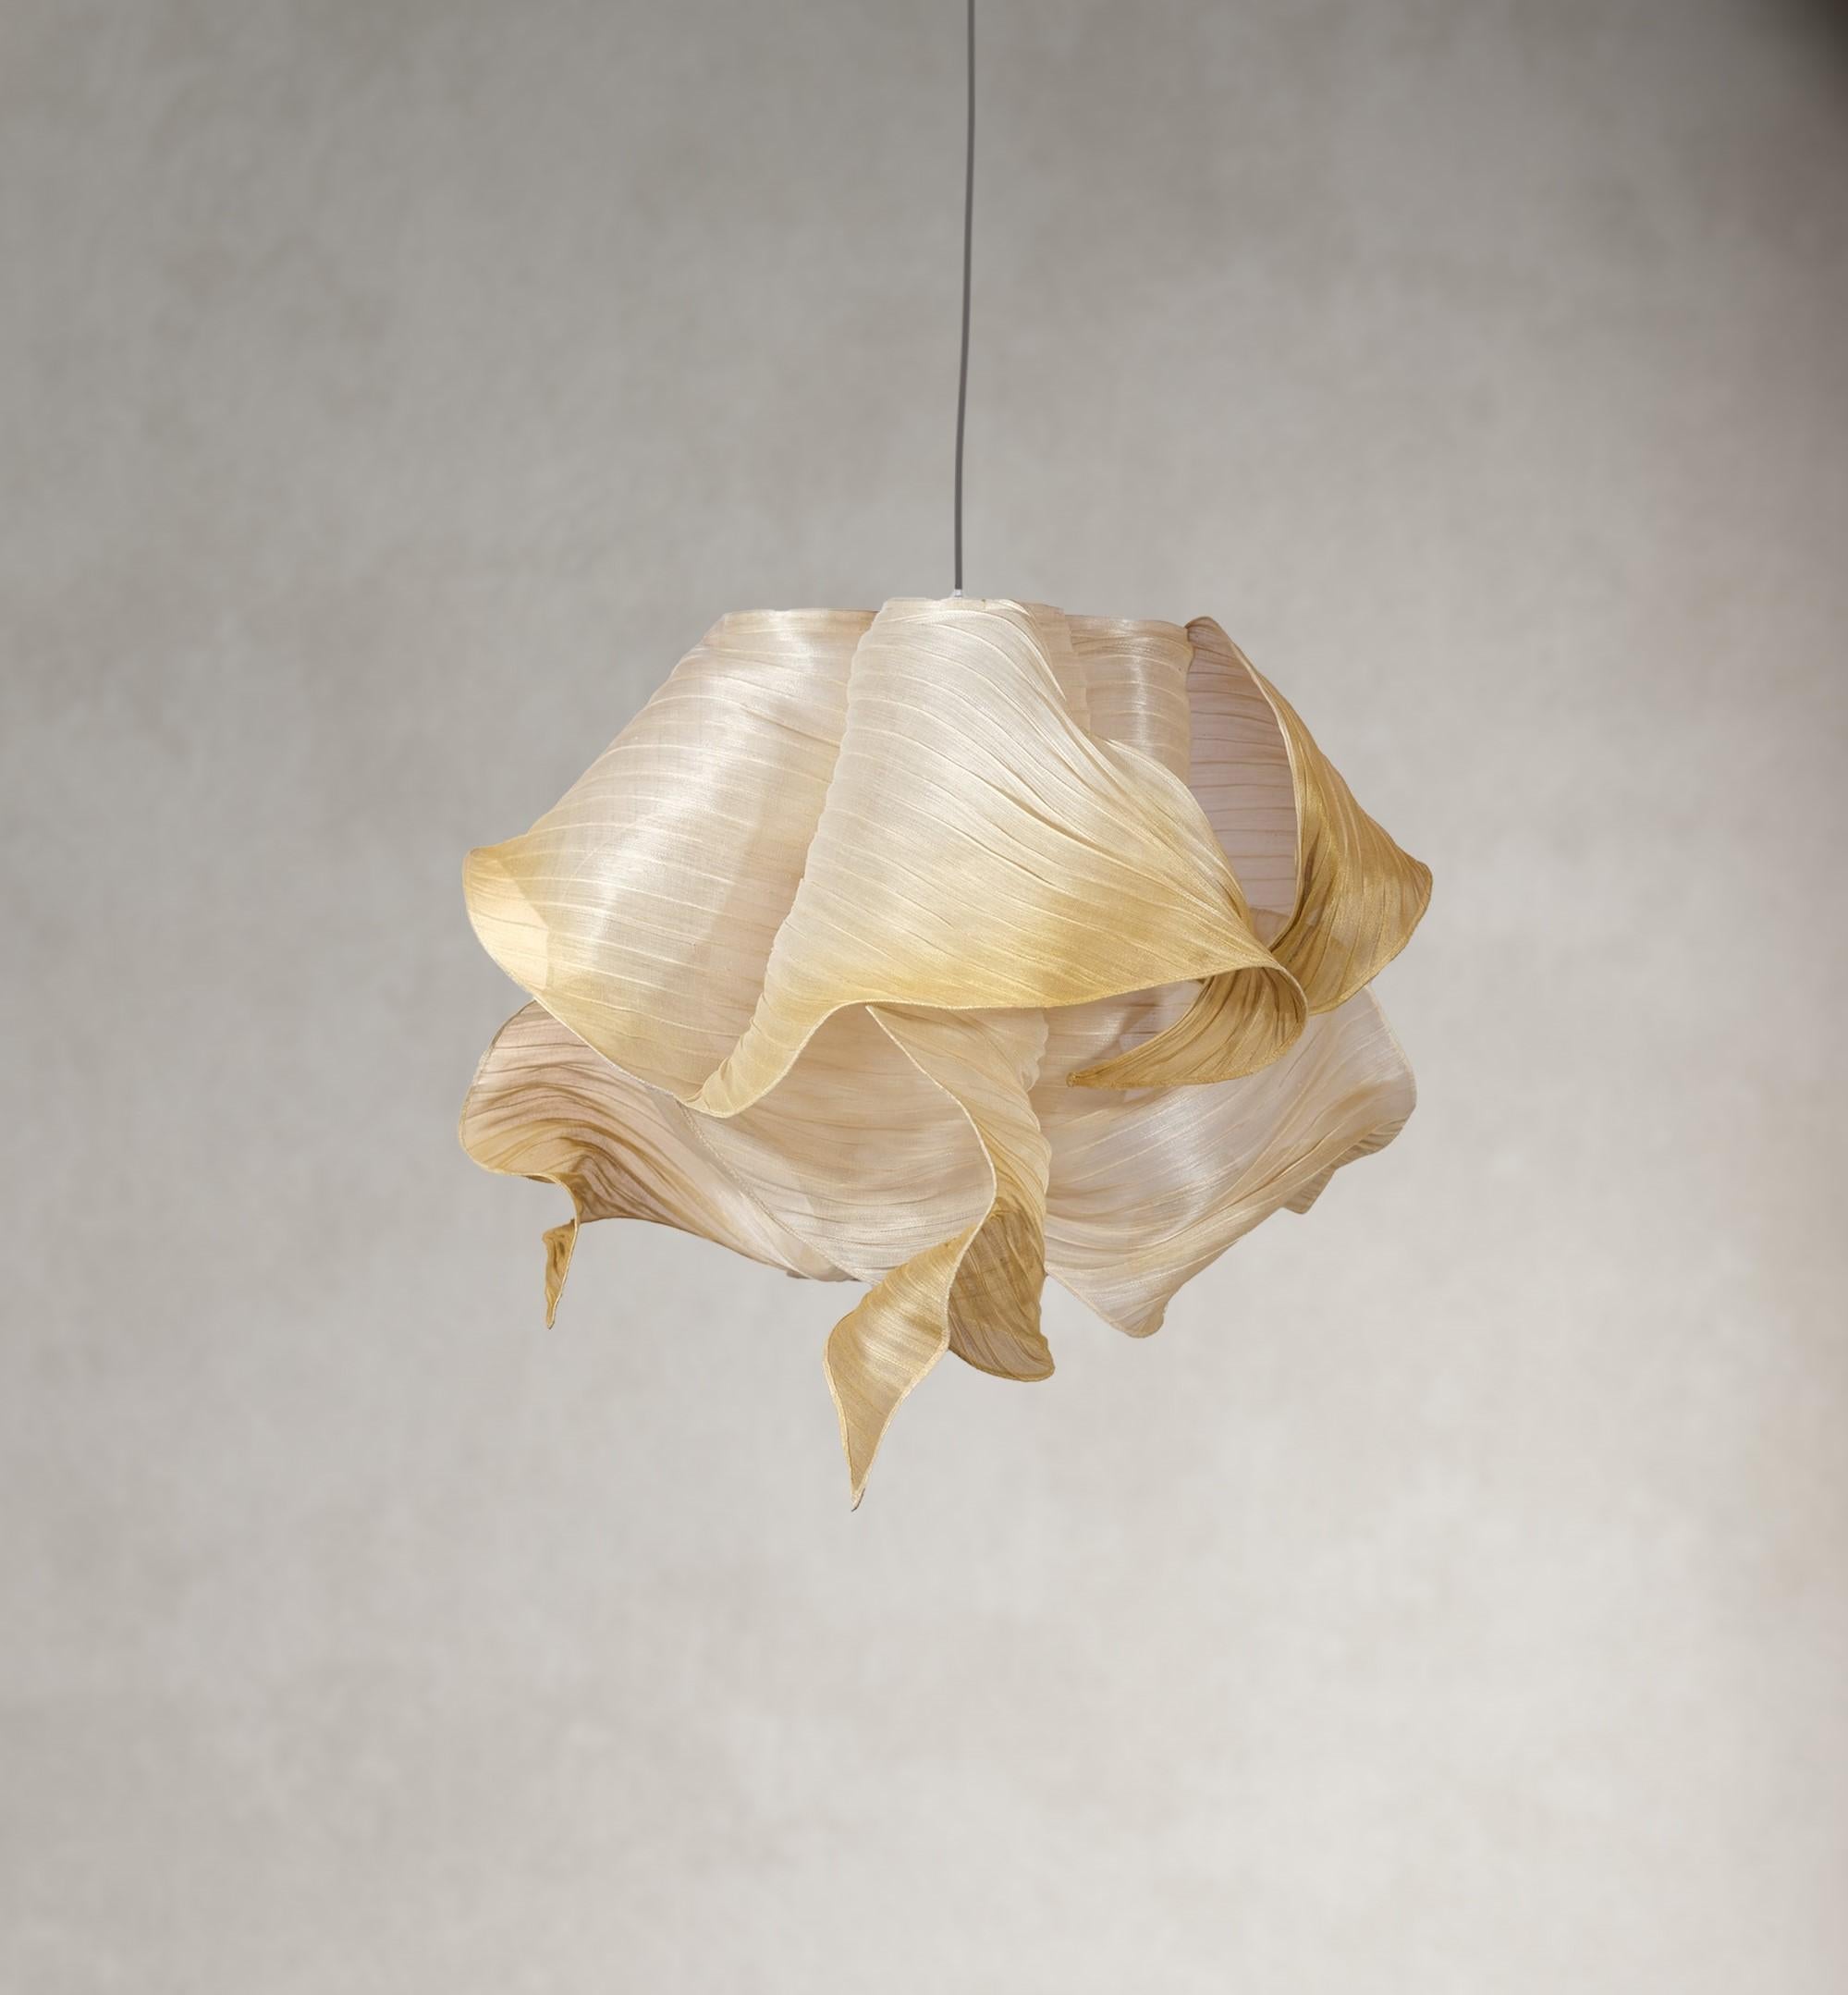 Gold Nebula hand painted pendant lamp by Mirei Monticelli
Dimensions: D 60 x W 60 x H 60 cm
Materials: Banaca fabric
Also available in hand painted fabric.

Providing soft light in an organic and unique design, the Nebula Lamp draws its